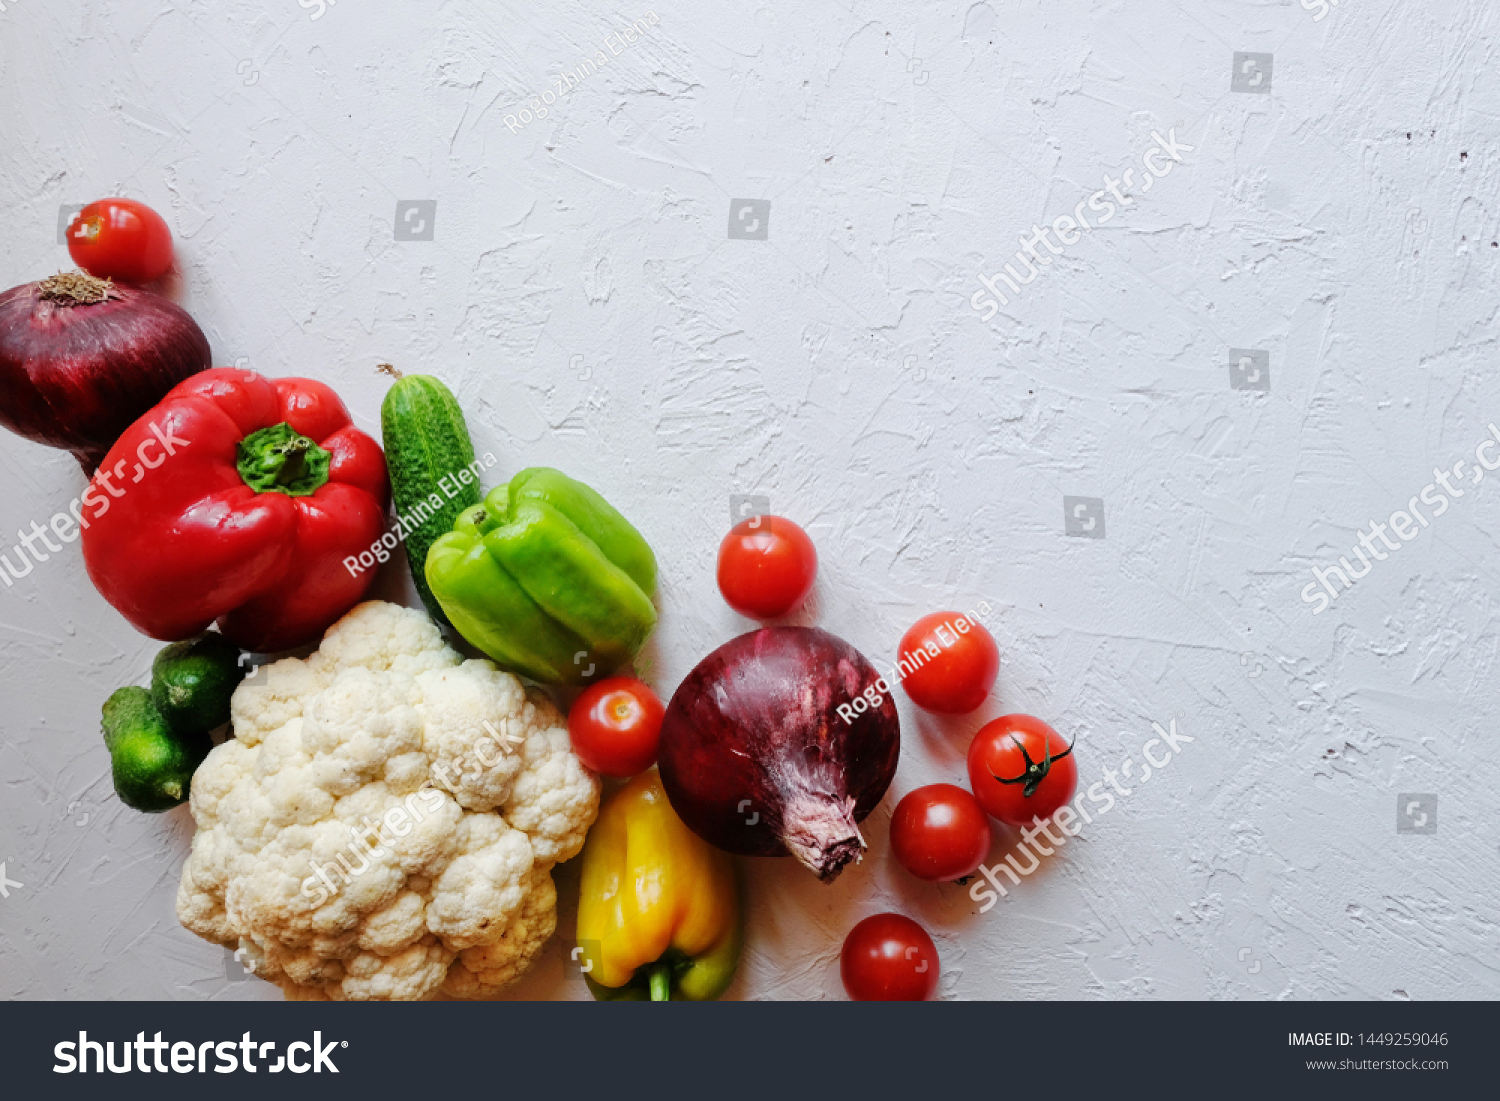 Diet concept. Ketogenic Diet , Vegan diet on chalkboard, health conceptual. Healthy fresh low carbohydrates food; tomatoes,cauliflower, cucumbers, onions,  sweet pepper. Top view. Copy space. #1449259046